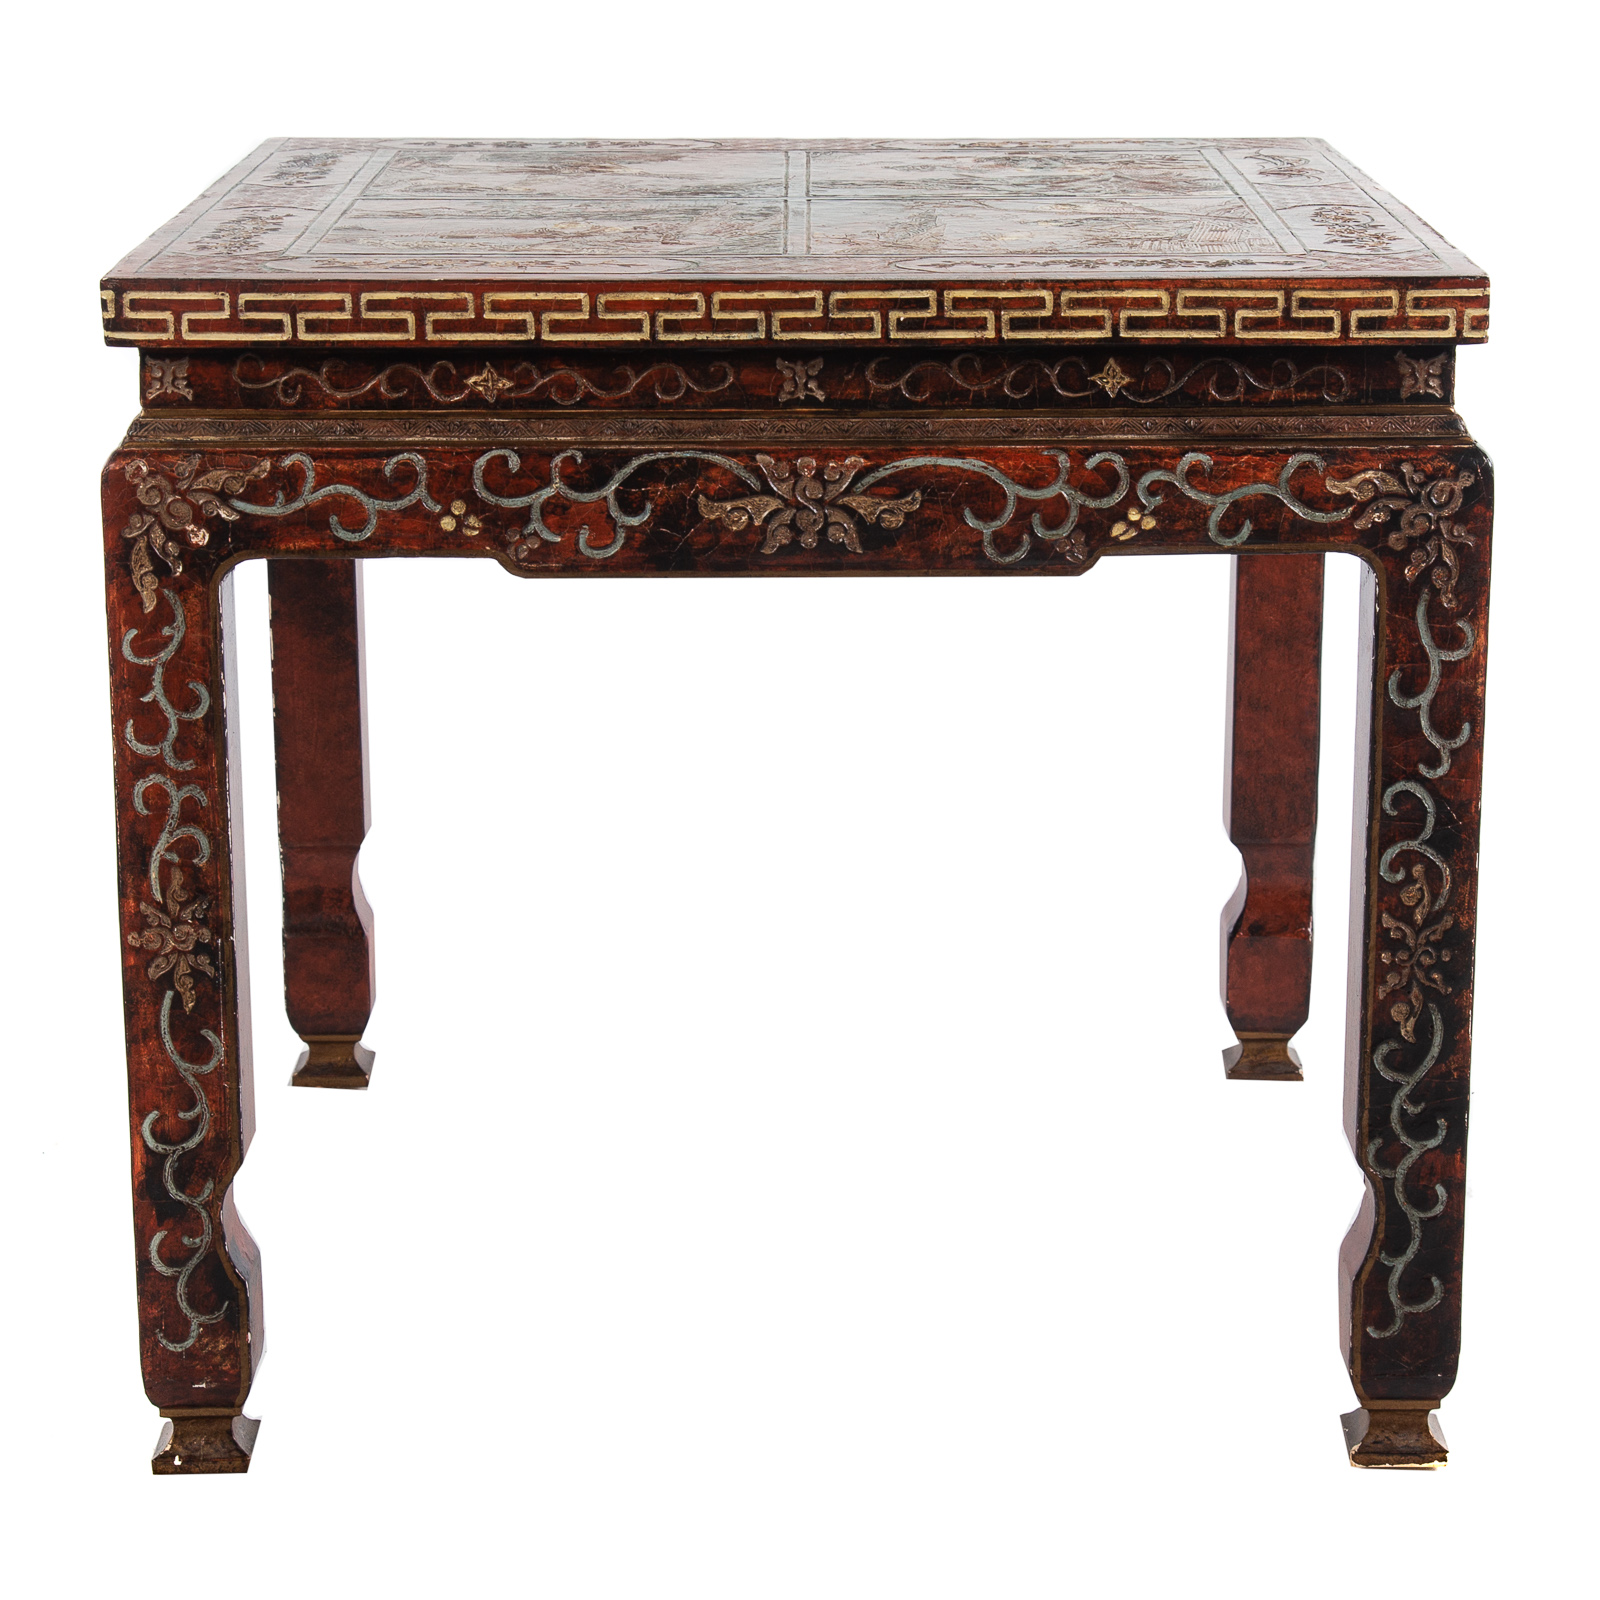 BAKER CHINOISERIE STYLE END TABLE 29e510